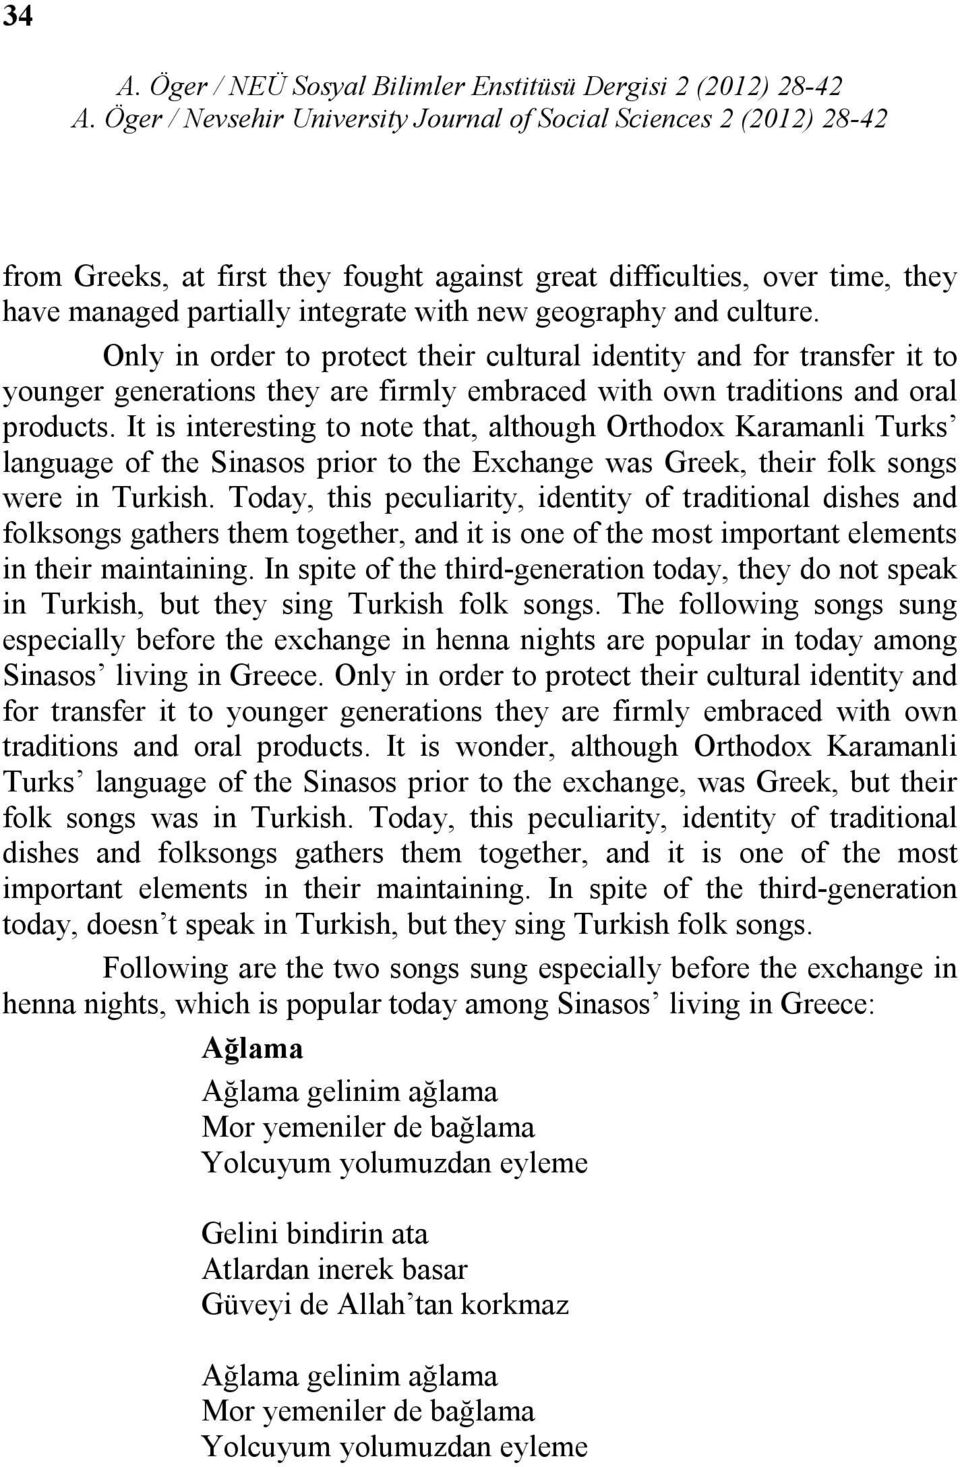 It is interesting to note that, although Orthodox Karamanli Turks language of the Sinasos prior to the Exchange was Greek, their folk songs were in Turkish.